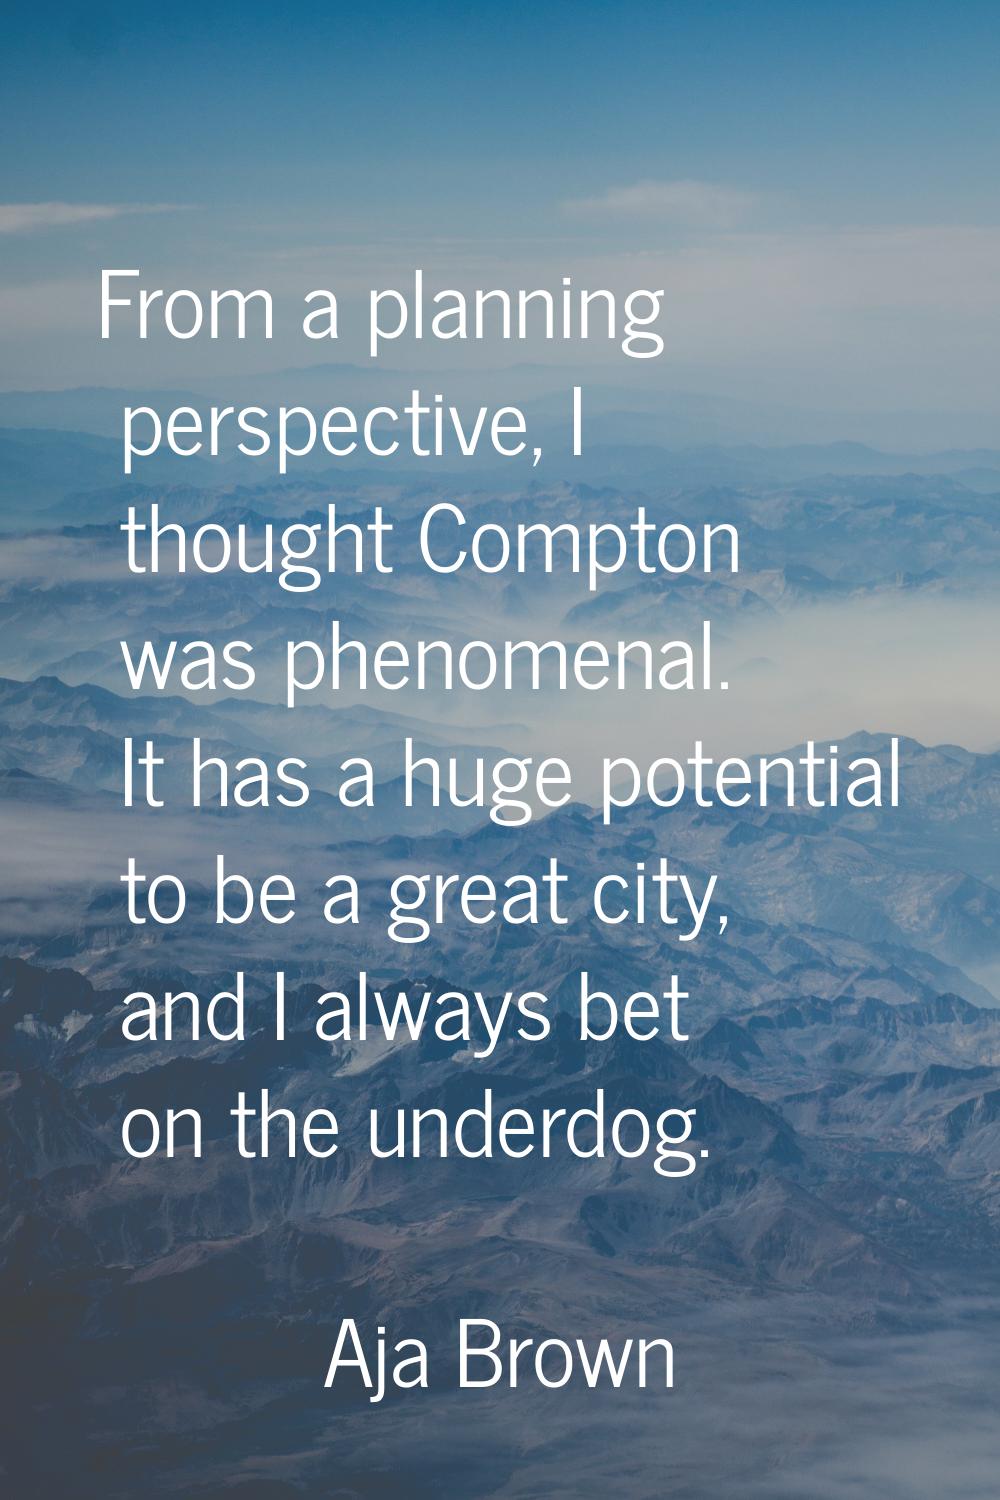 From a planning perspective, I thought Compton was phenomenal. It has a huge potential to be a grea